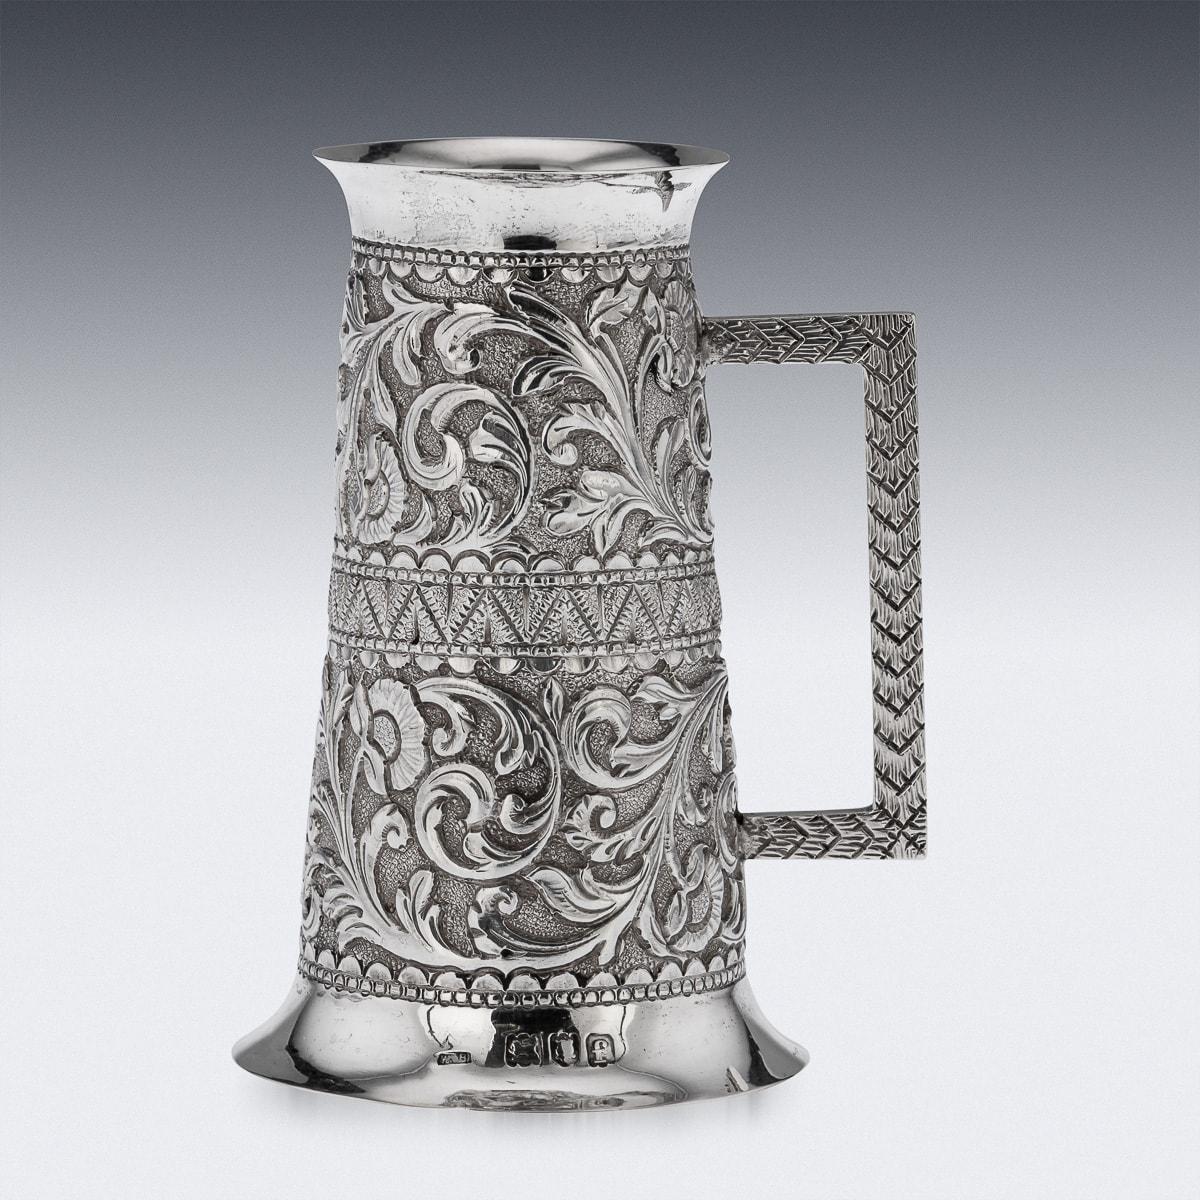 Antique early 20th Century Edwardian solid silver double spirit measure cup, of traditional size in a tapering body form decorated with Indian Kutch inspired decoration. Hallmarked English silver (925 standard), London, year 1901 (f), Maker W.B